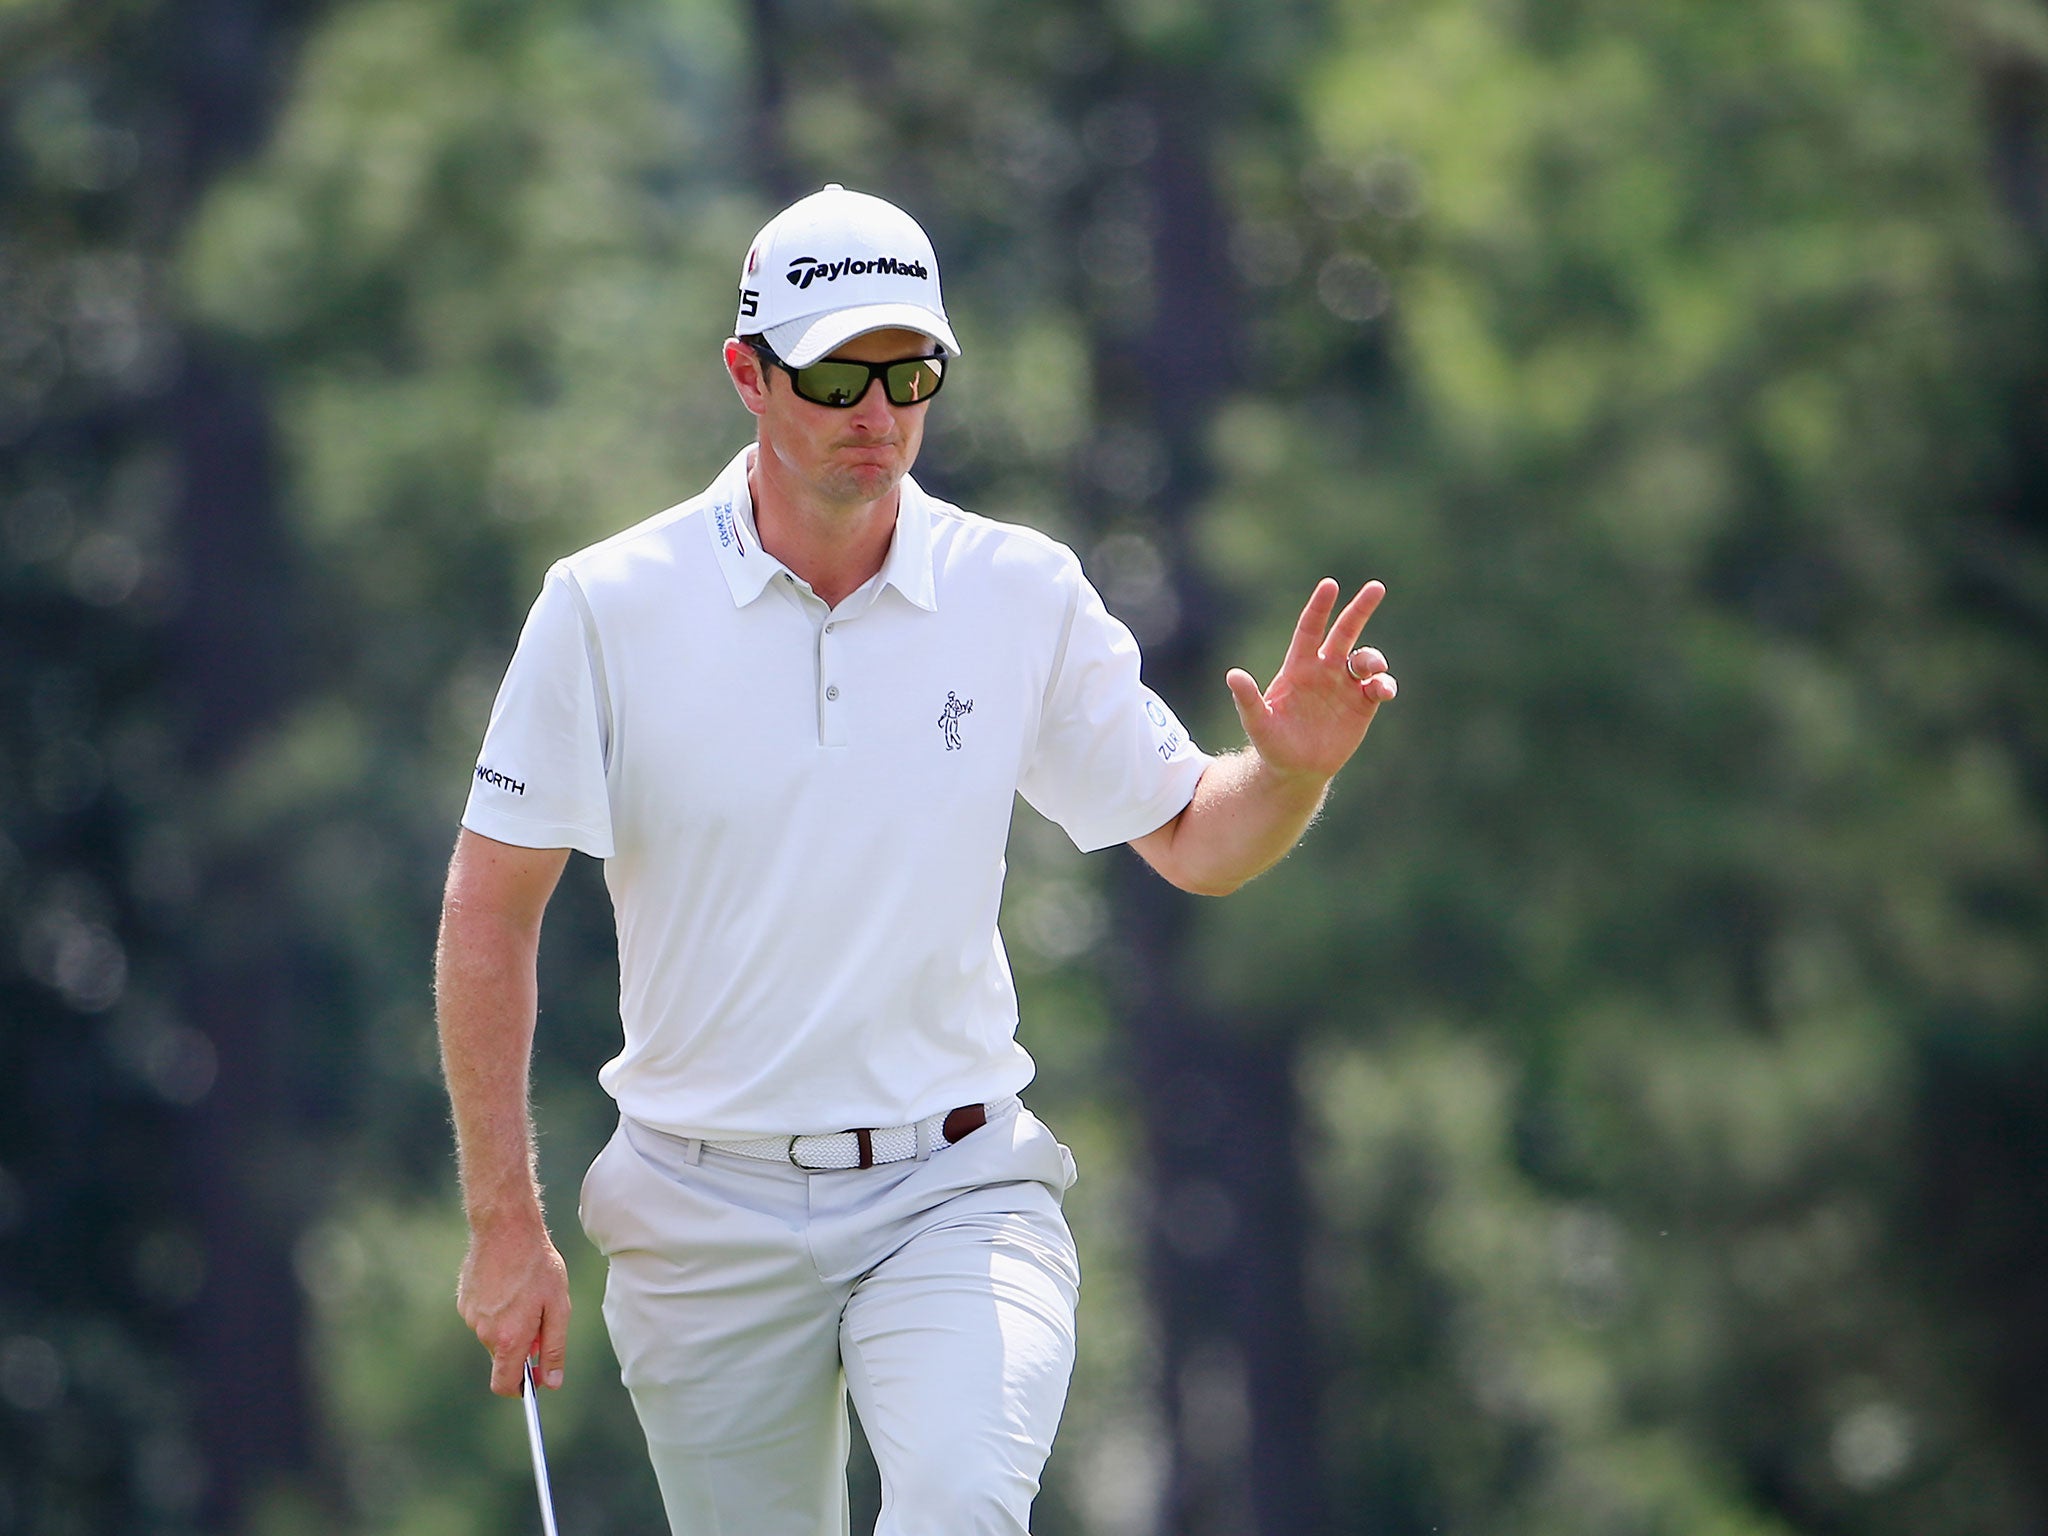 Justin Rose carded a 67 to share second place after the opening round